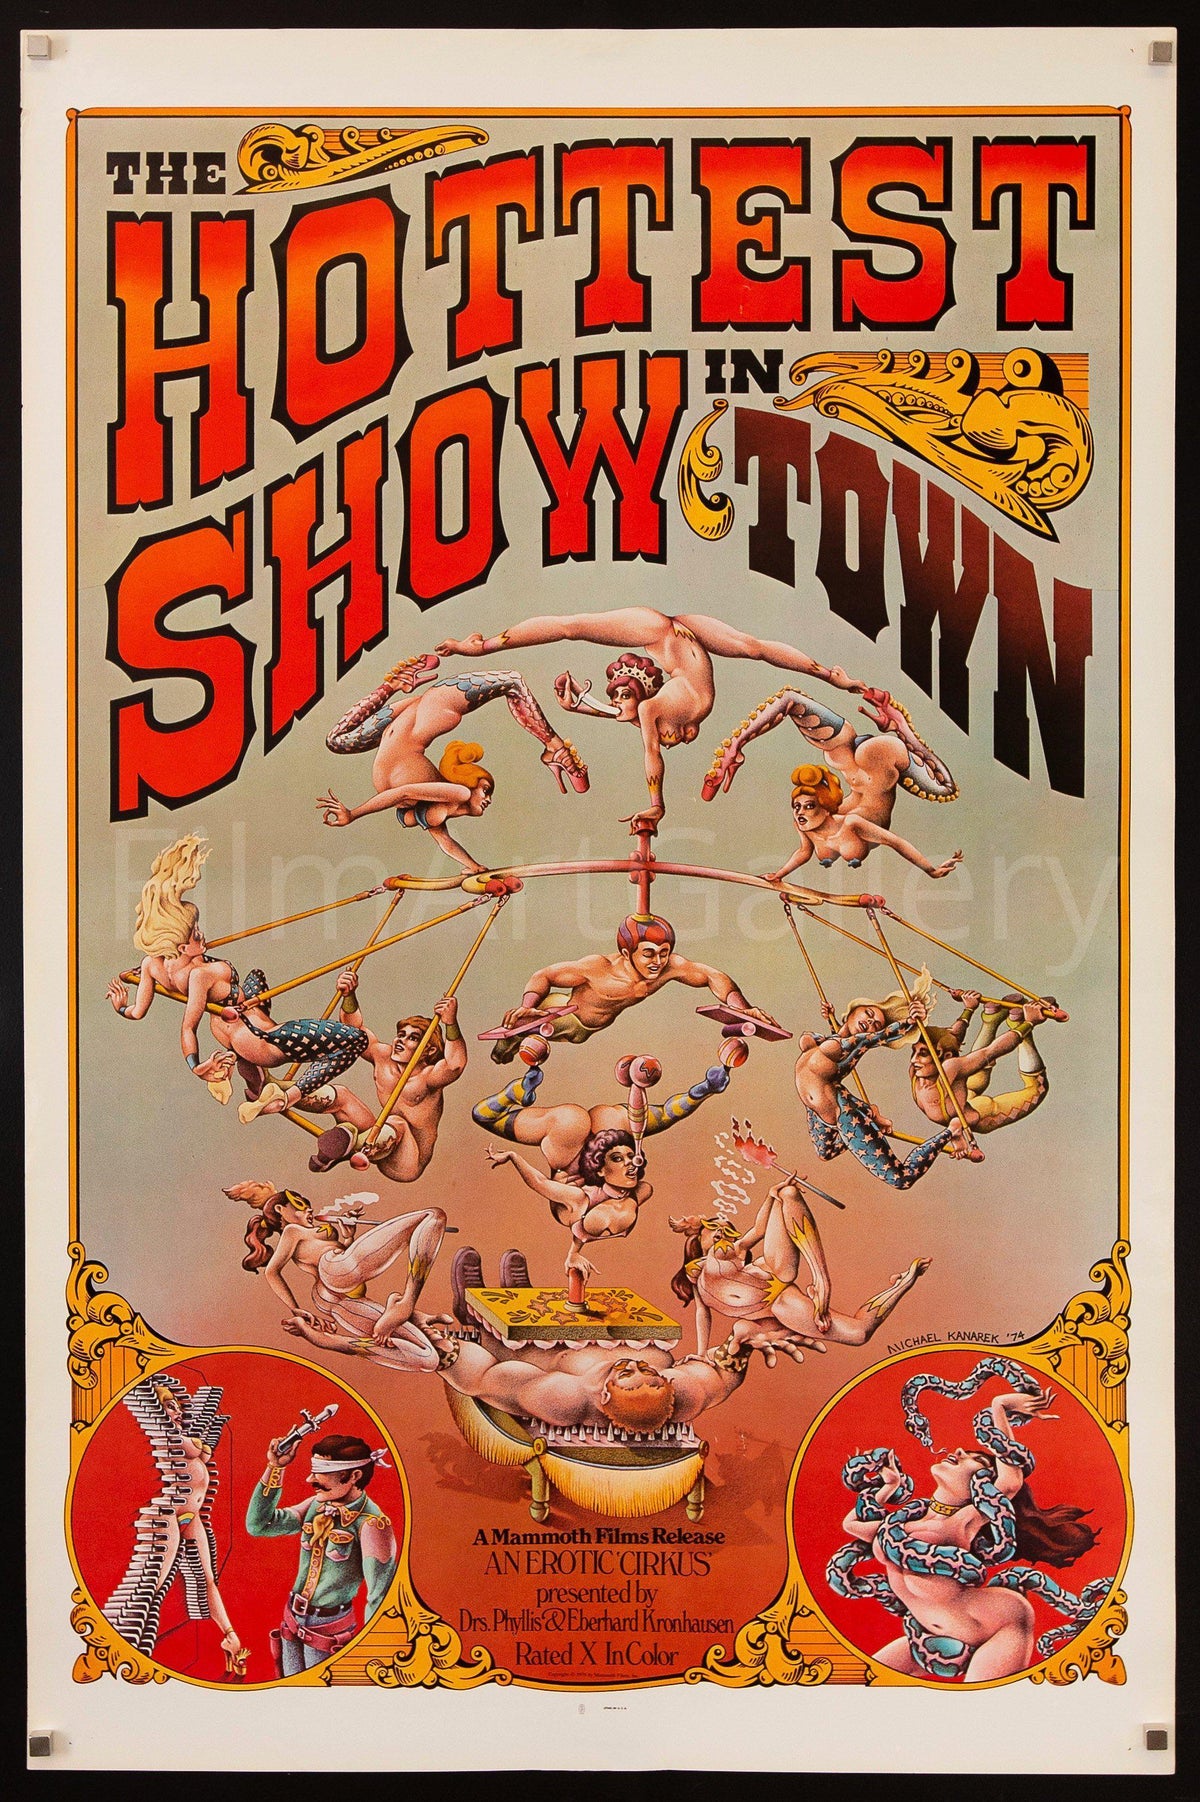 The Hottest Show In Town 1 Sheet (27x41) Original Vintage Movie Poster